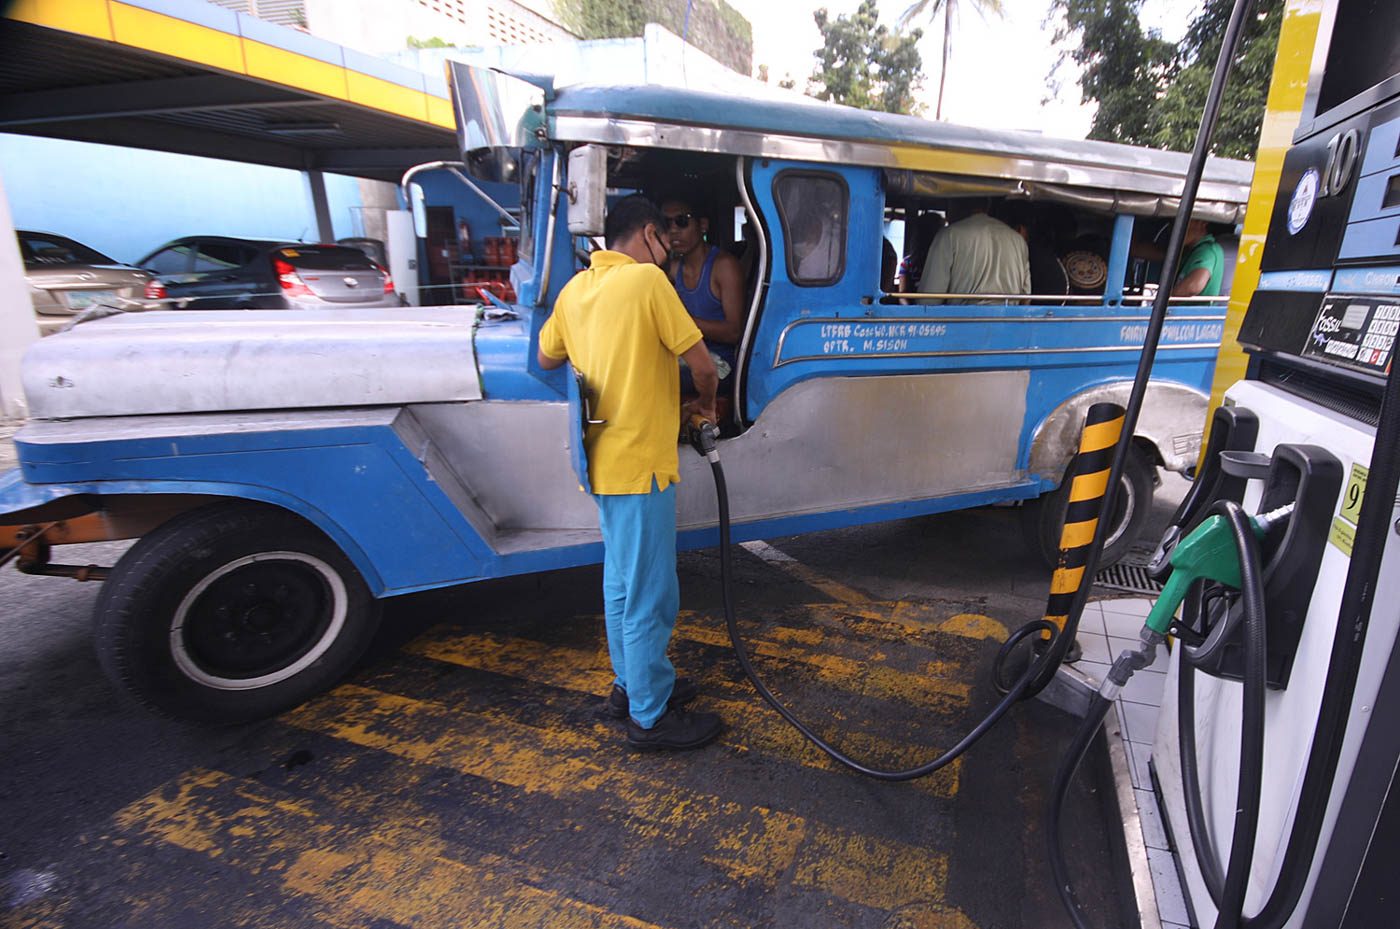 Oil price hike on January 8 not due to Train Law – DOE